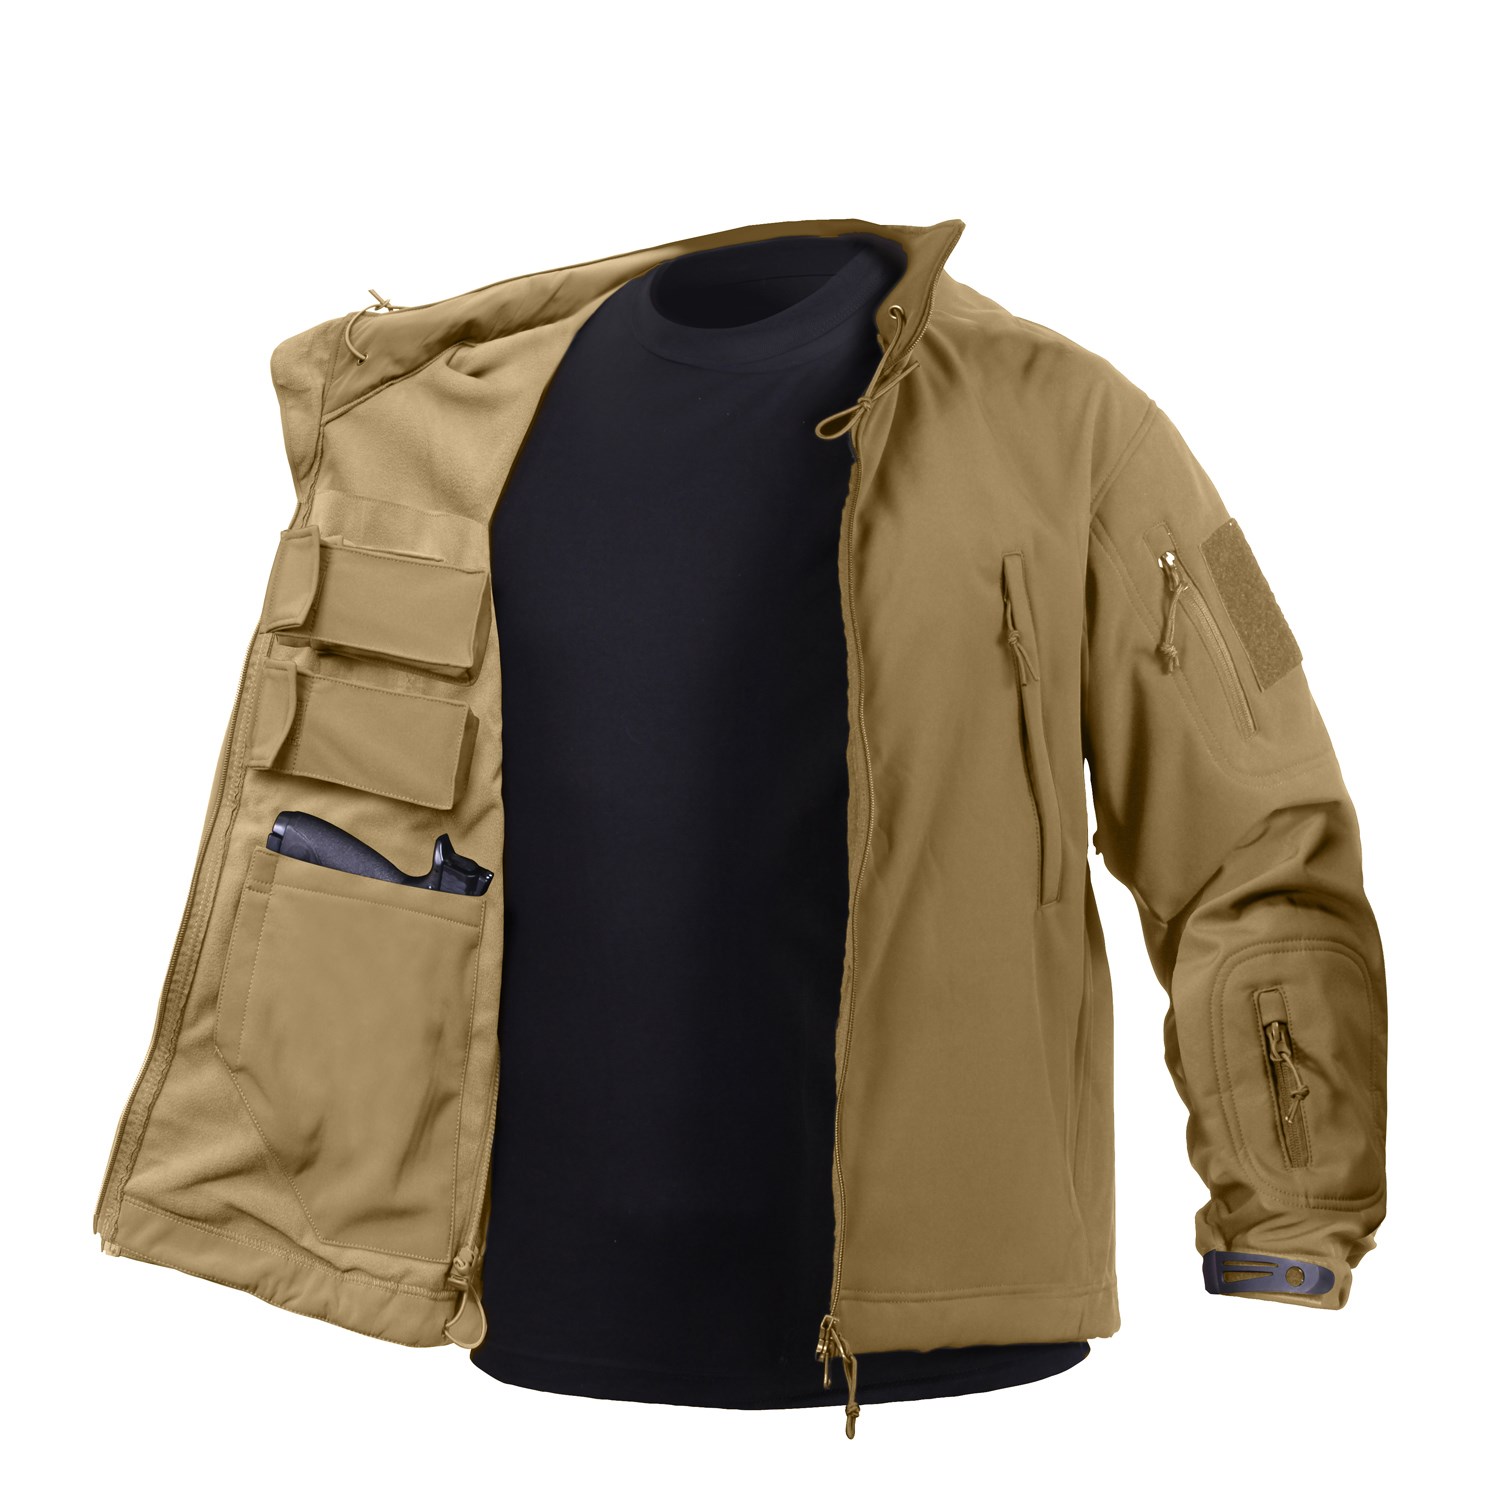 Bunda CONCEALED CARRY softshell COYOTE BROWN Velikost: XL